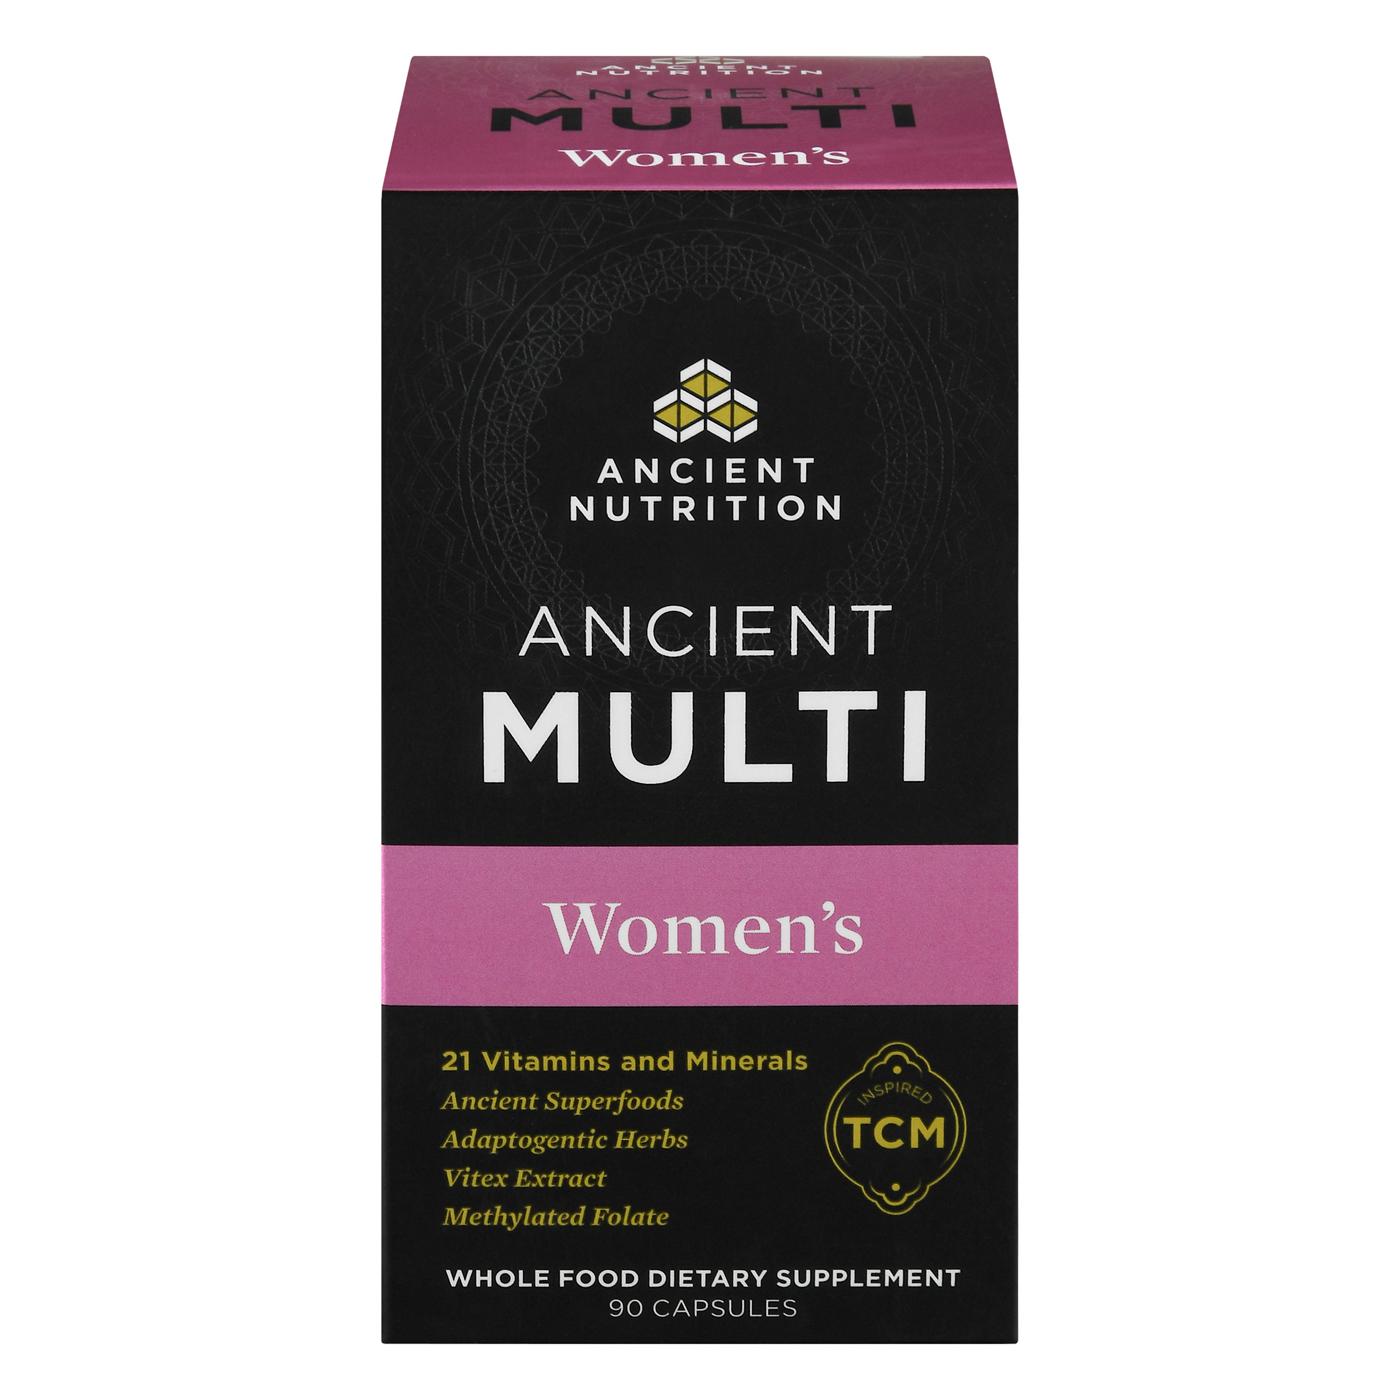 Ancient Nutrition Women's Multi Capsules; image 1 of 2